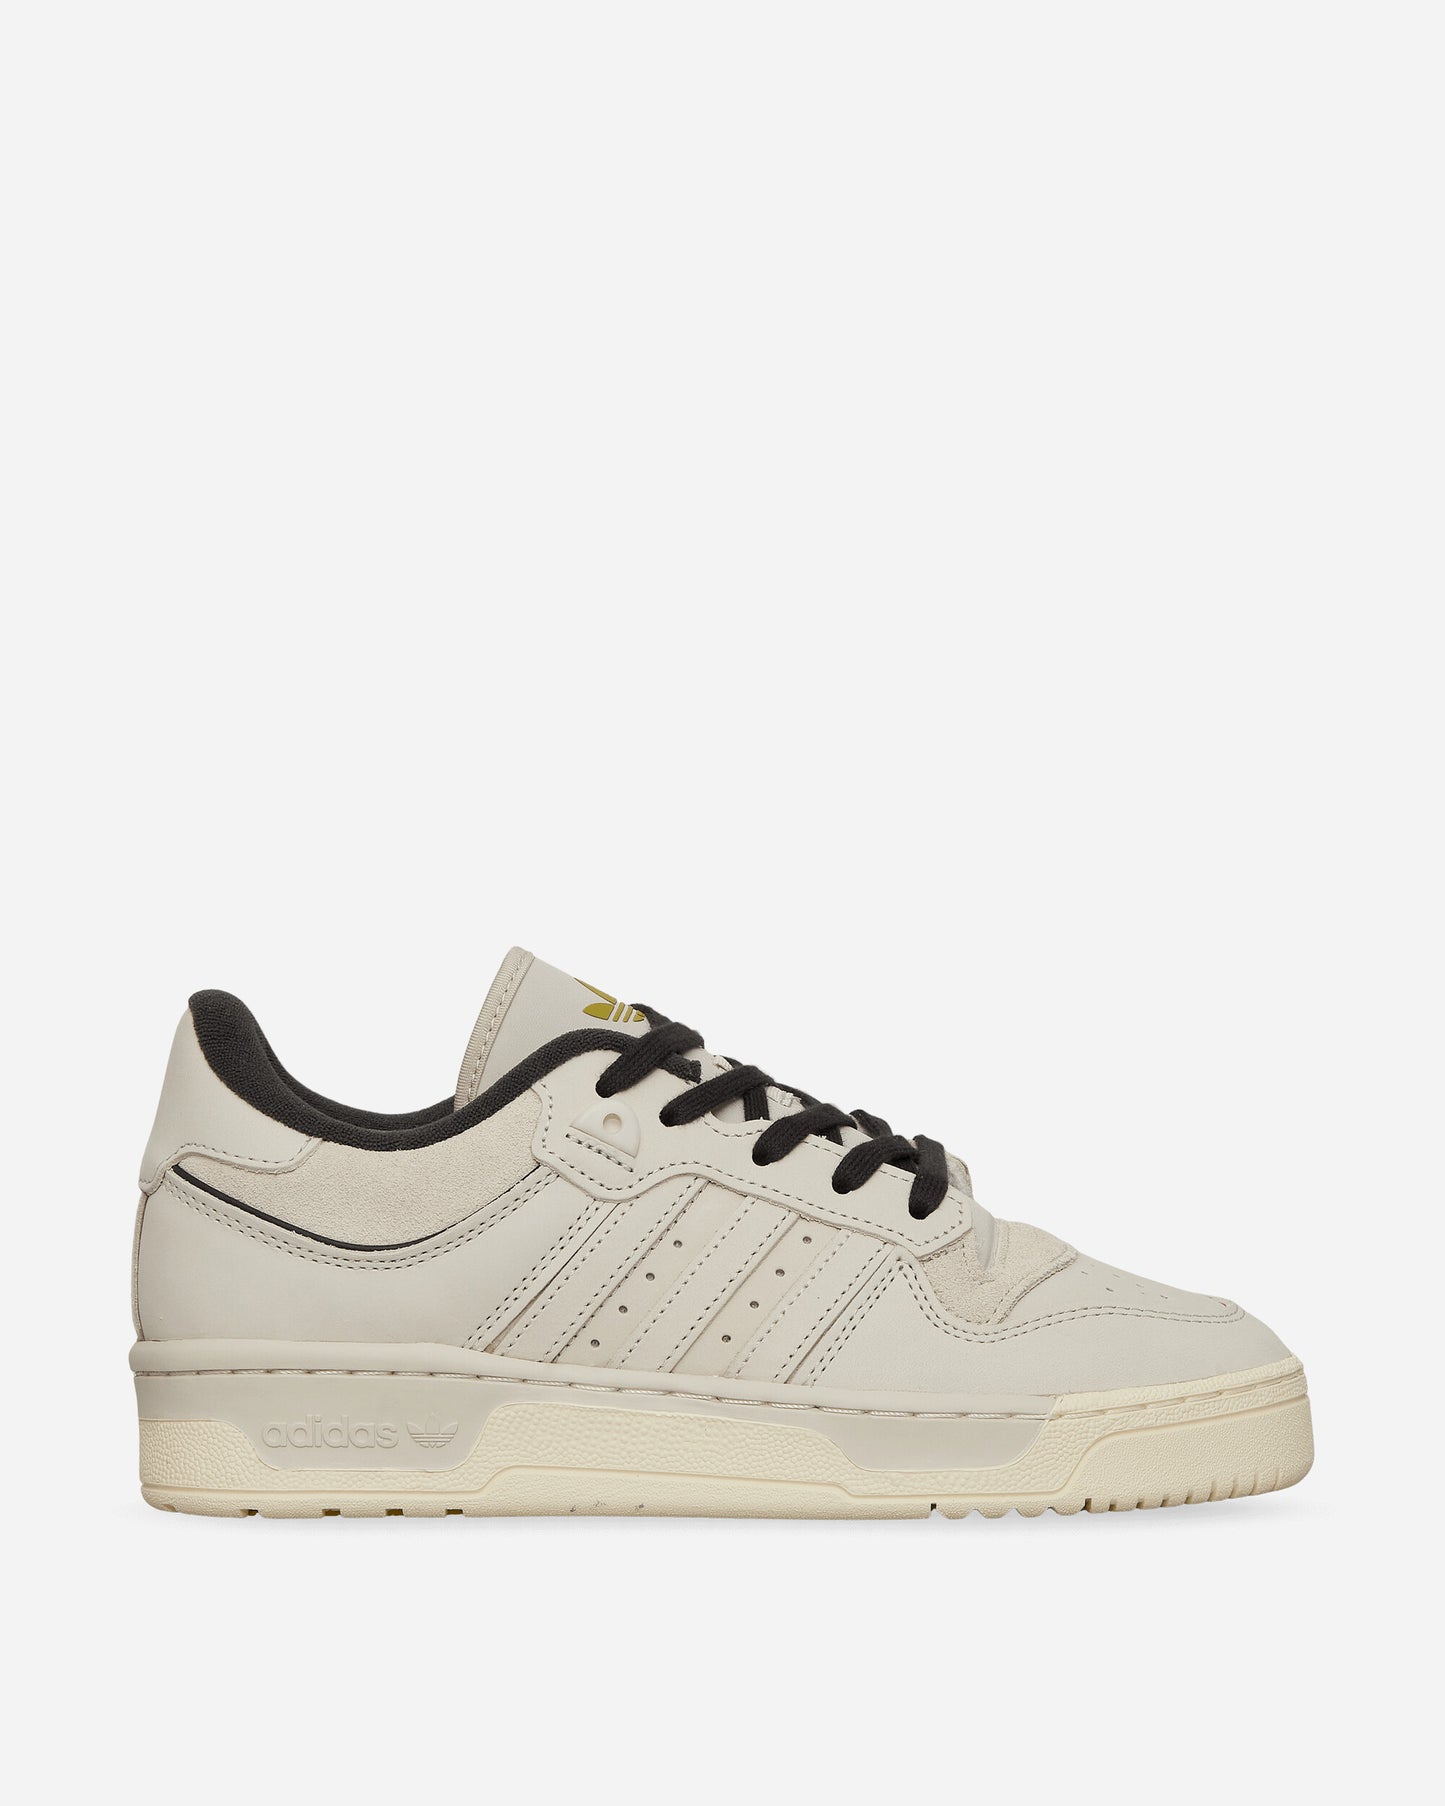 adidas Rivalry 86 Low 003 Talc/Carbon Sneakers Low IF3402 001